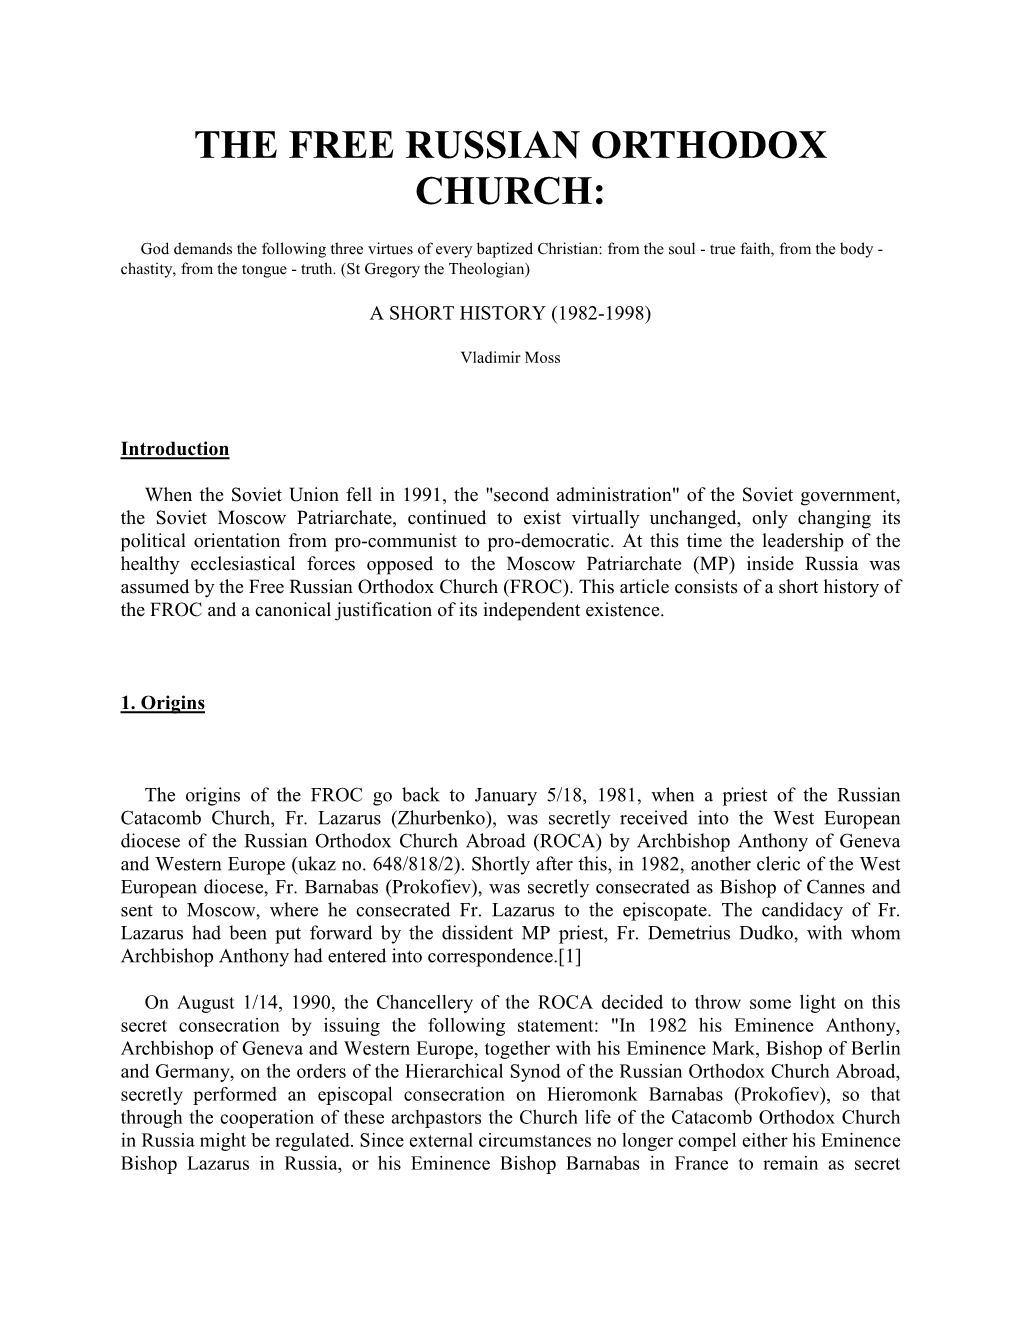 History of the Free Russian Orthodox Church